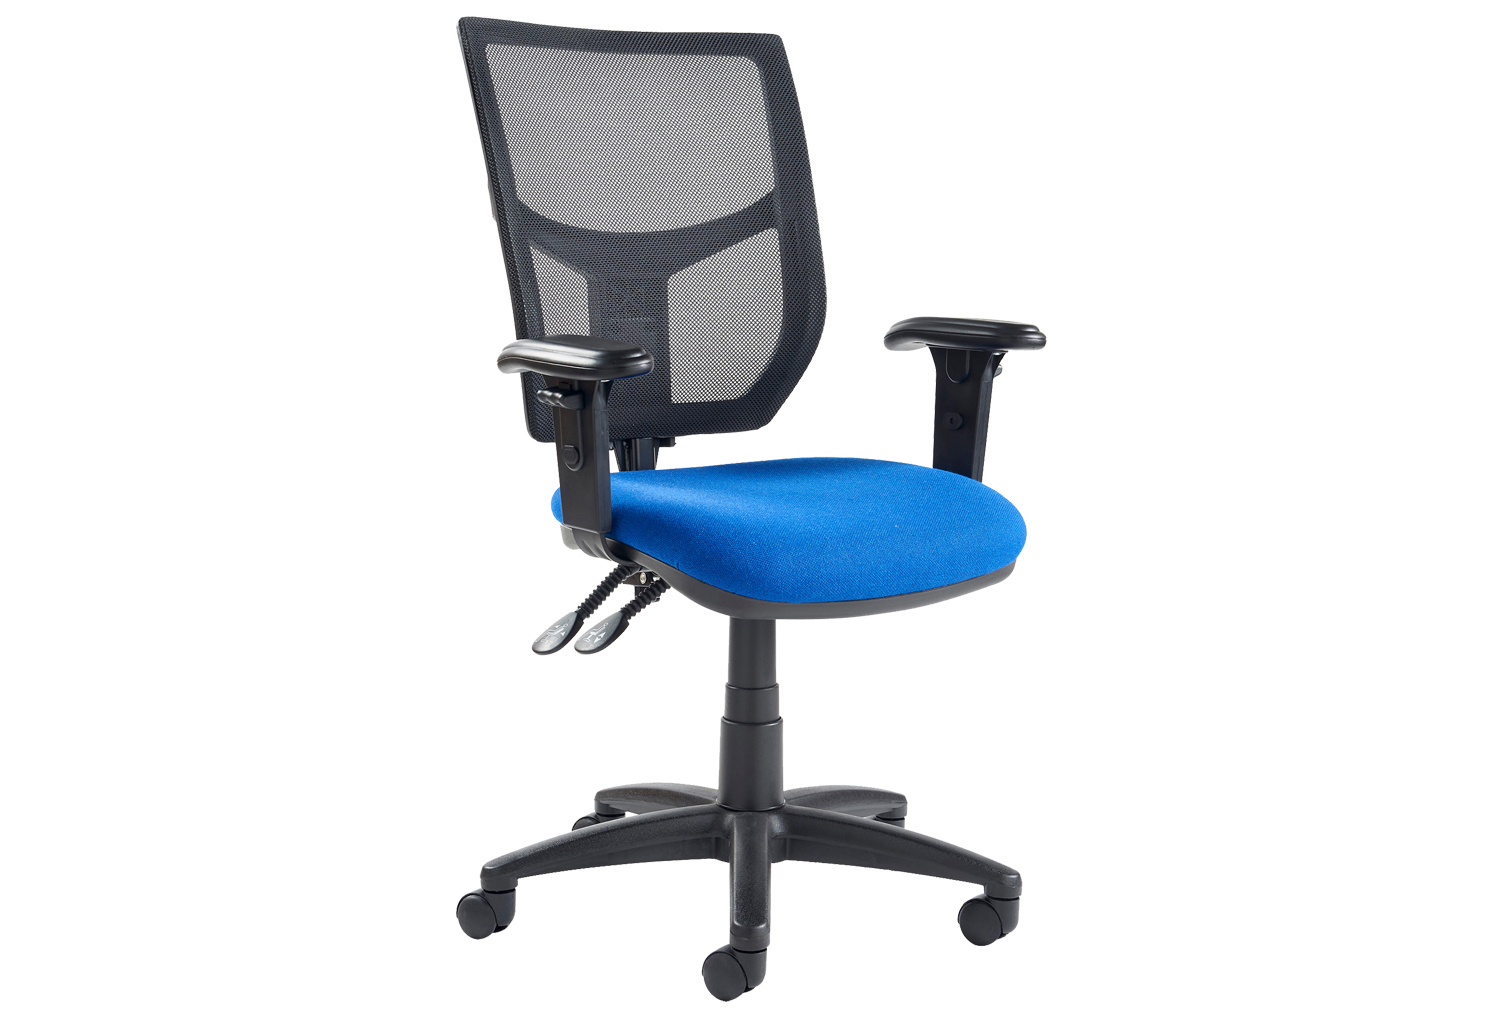 Gordy 3 Lever Mesh Back Operator Office Chair With Adjustable Arms, Scuba